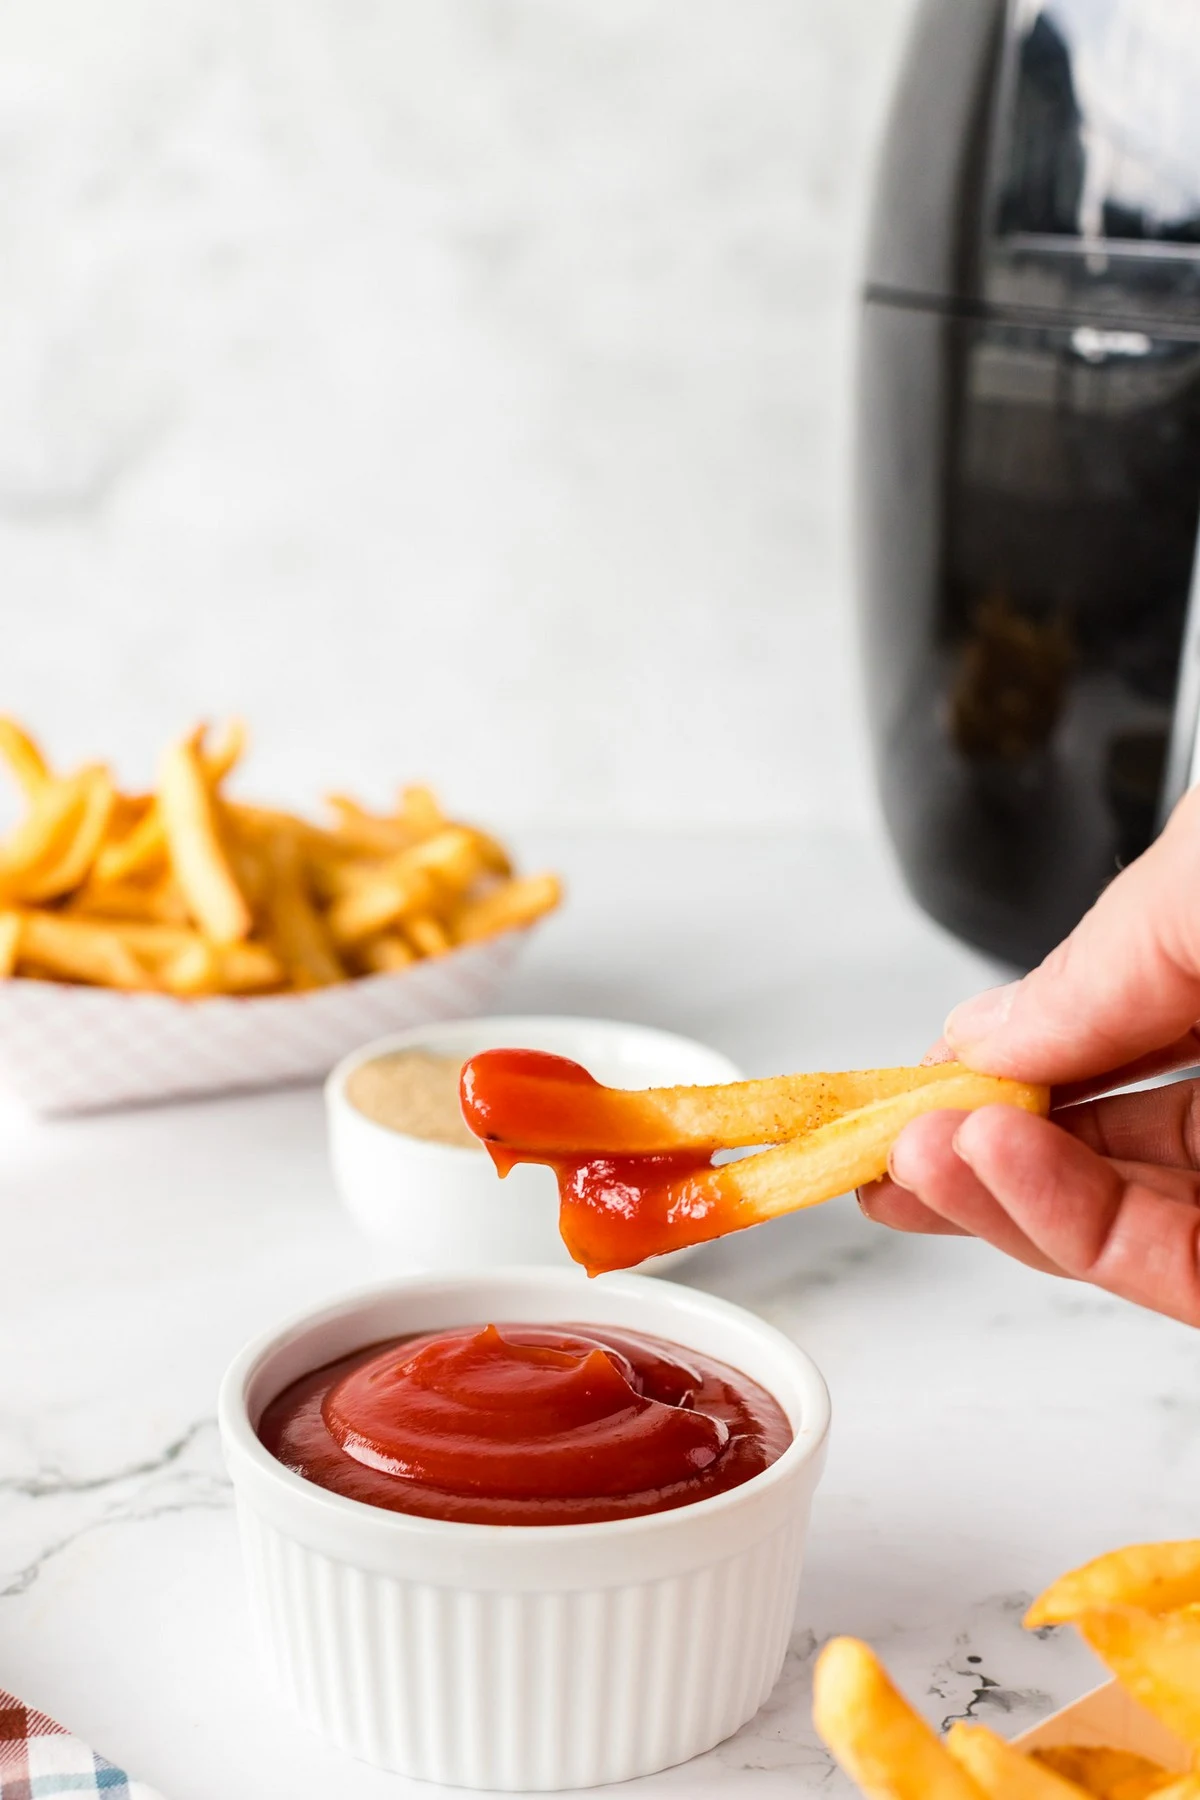 Best Frozen French Fries for Air Fryer or Oven